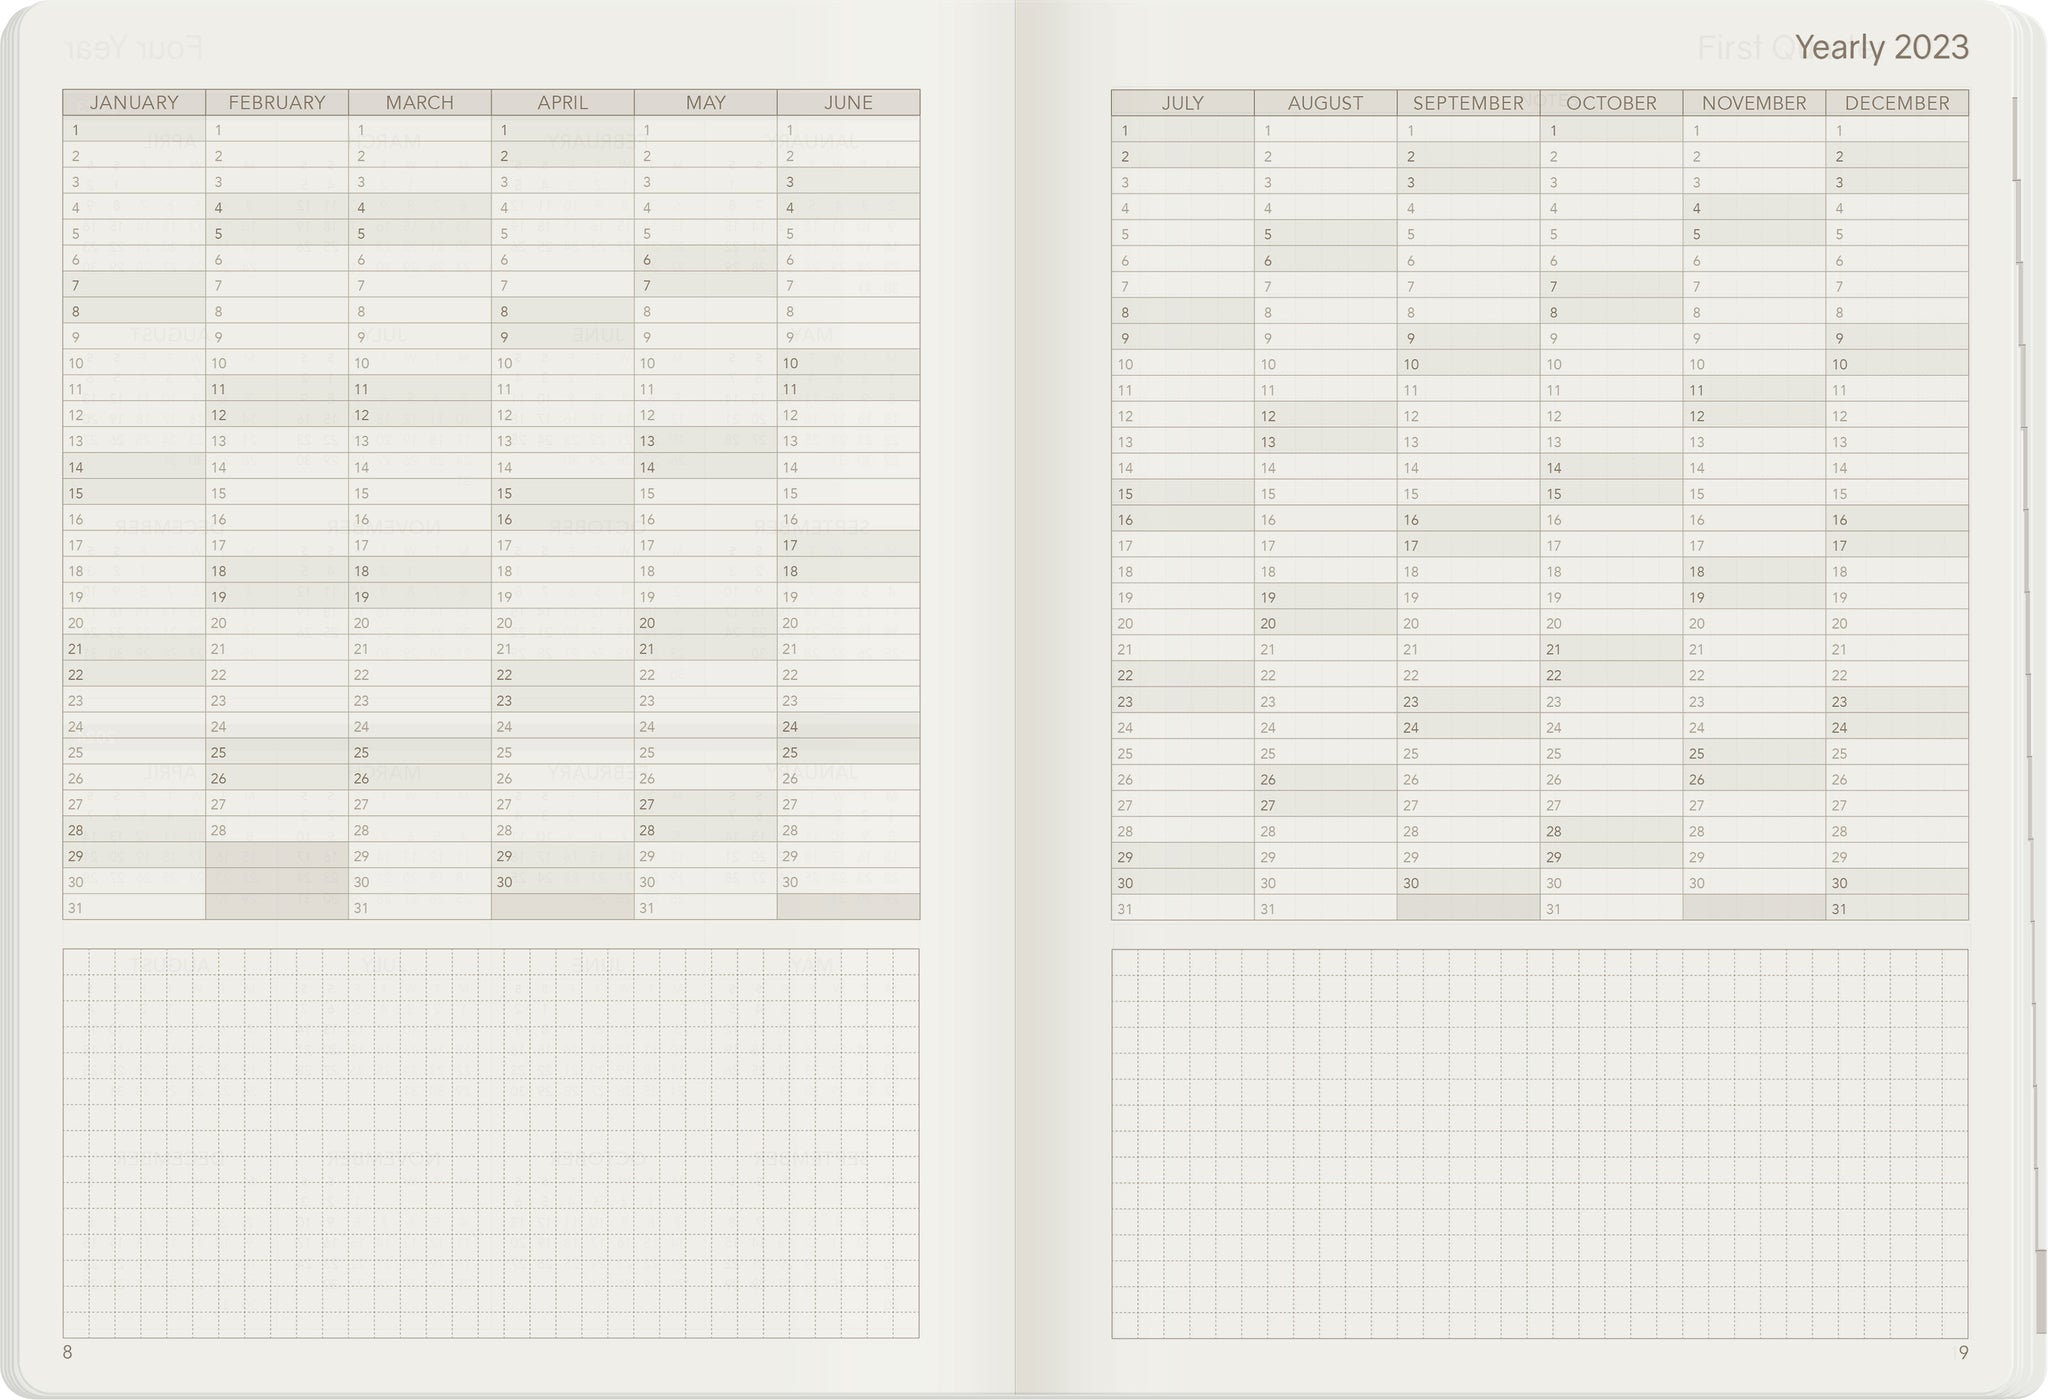 Sale | 2023 A5 Weekly Planner - 52gsm Tomoe River Paper